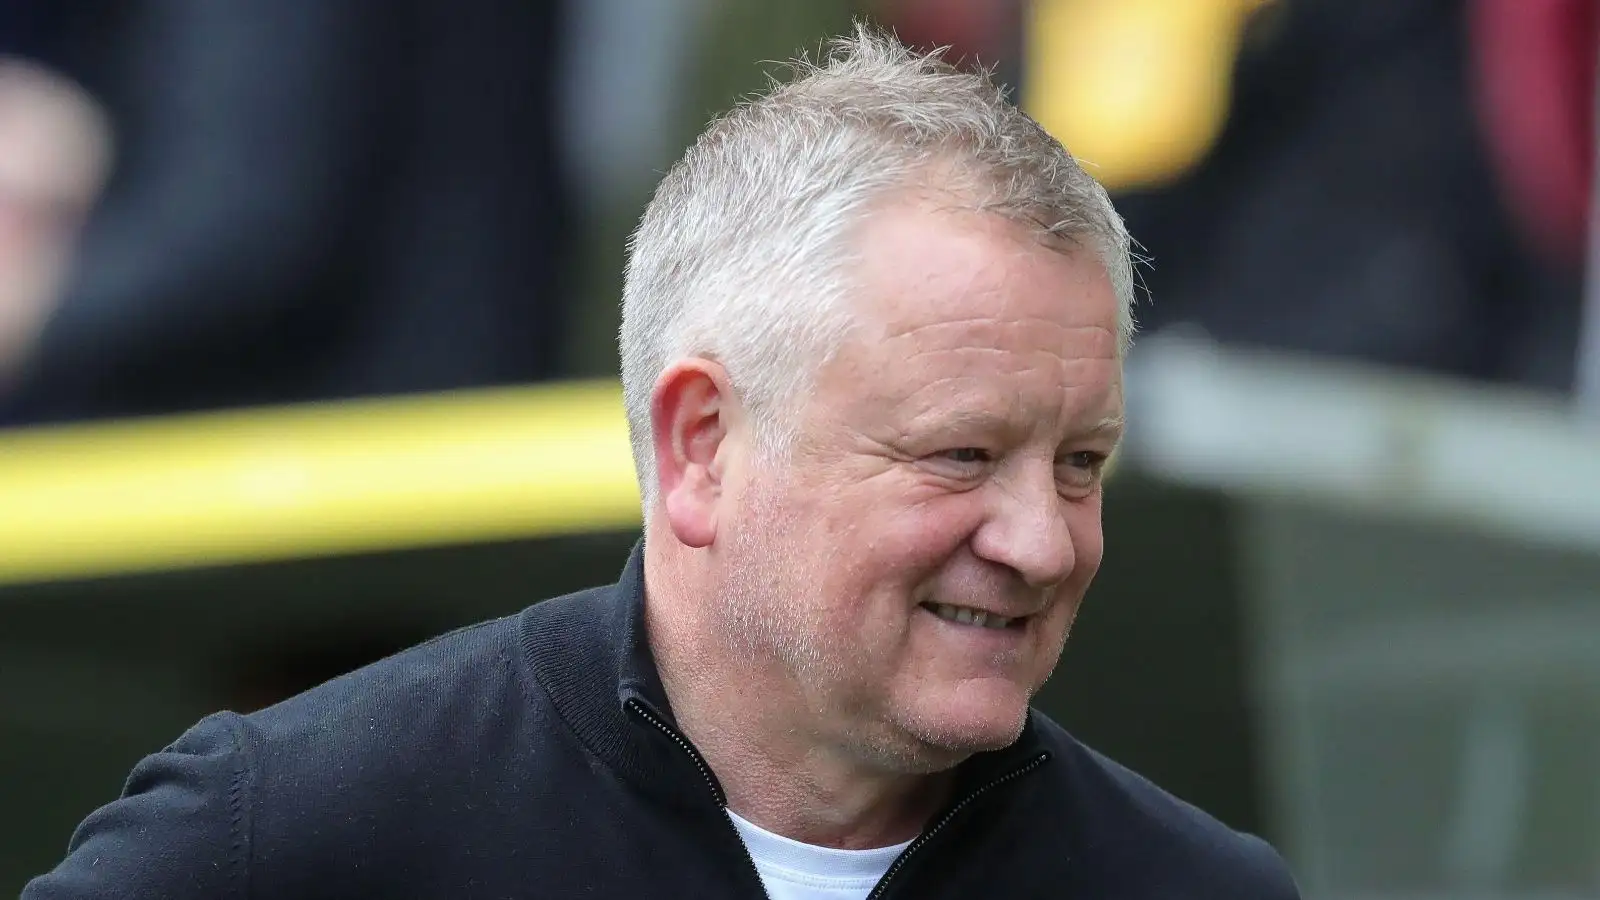 Chris Wilder replaces Paul Heckingbottom as Sheffield United manager